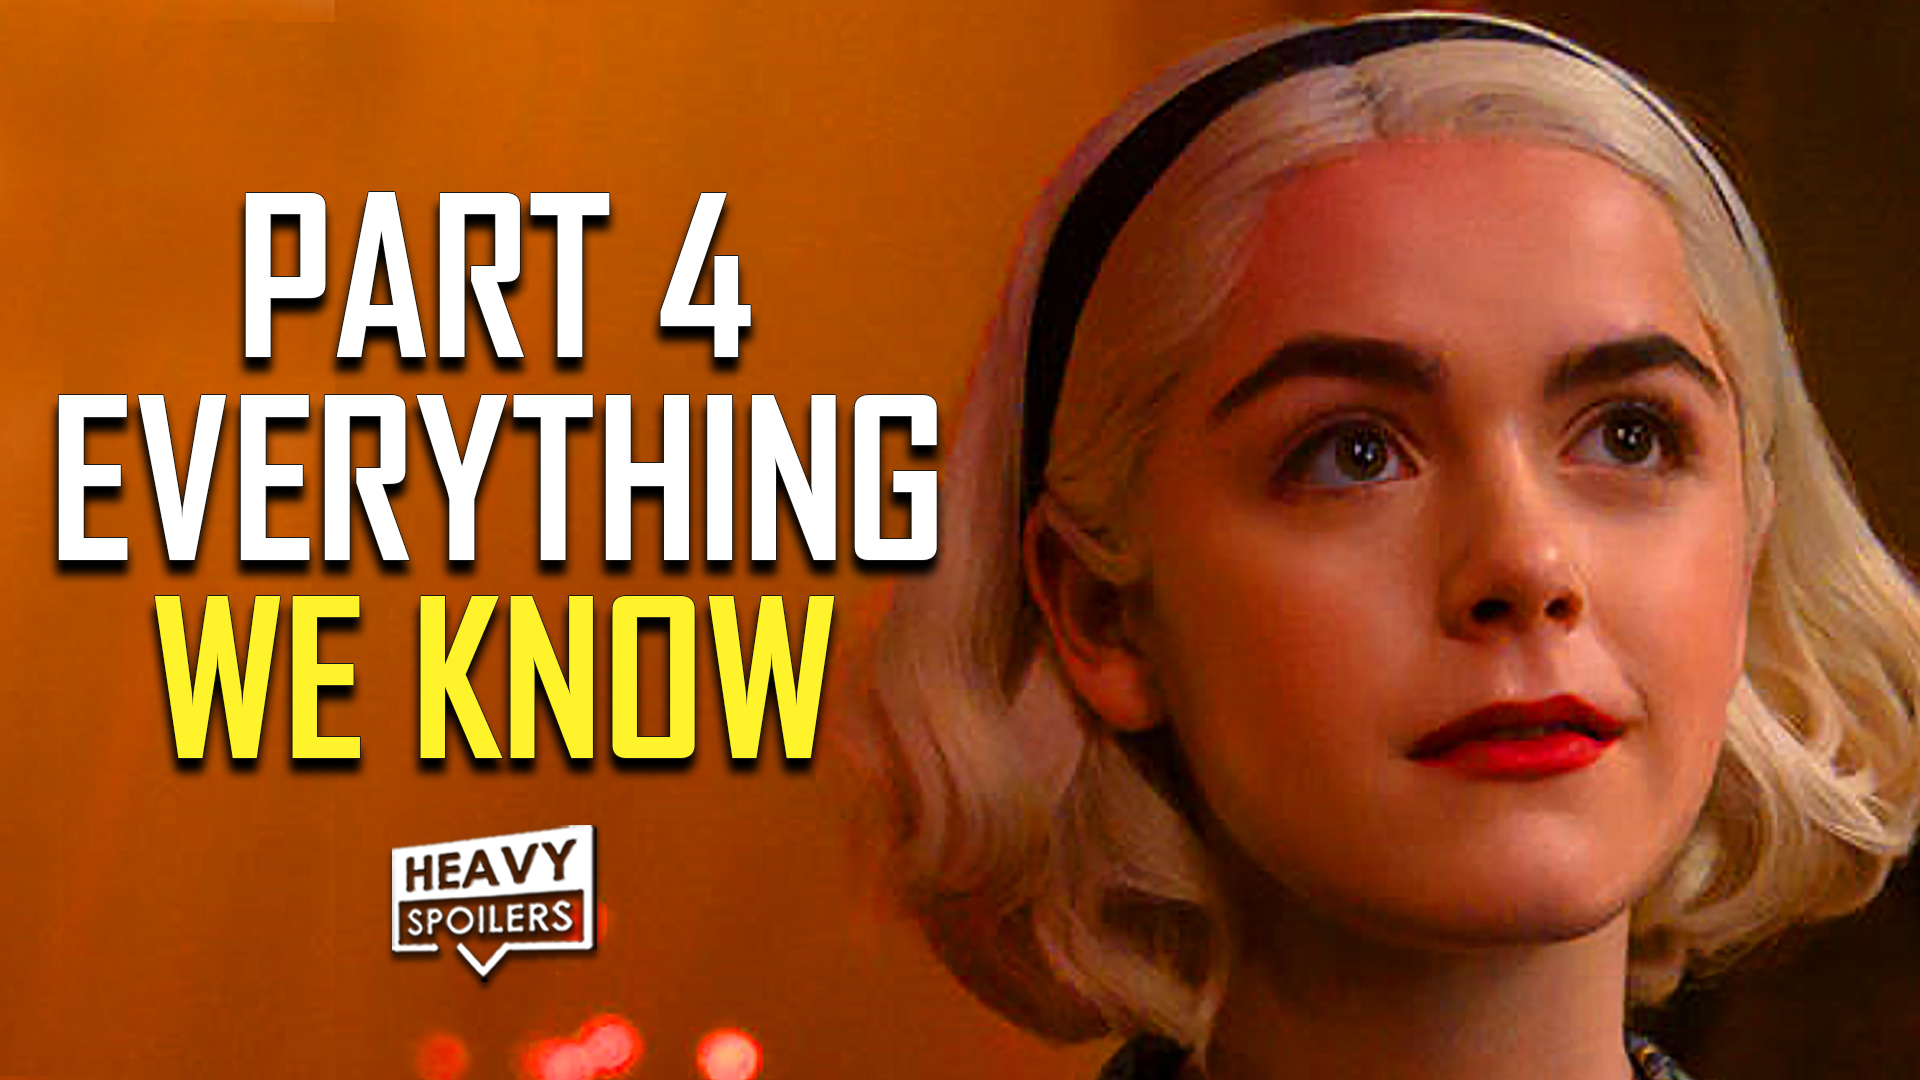 chilling adventures of sabrina season 4 everything we know so far release date cast plot ending explained spoiler talk review part 3 predictions breakdown easter eggs 4k